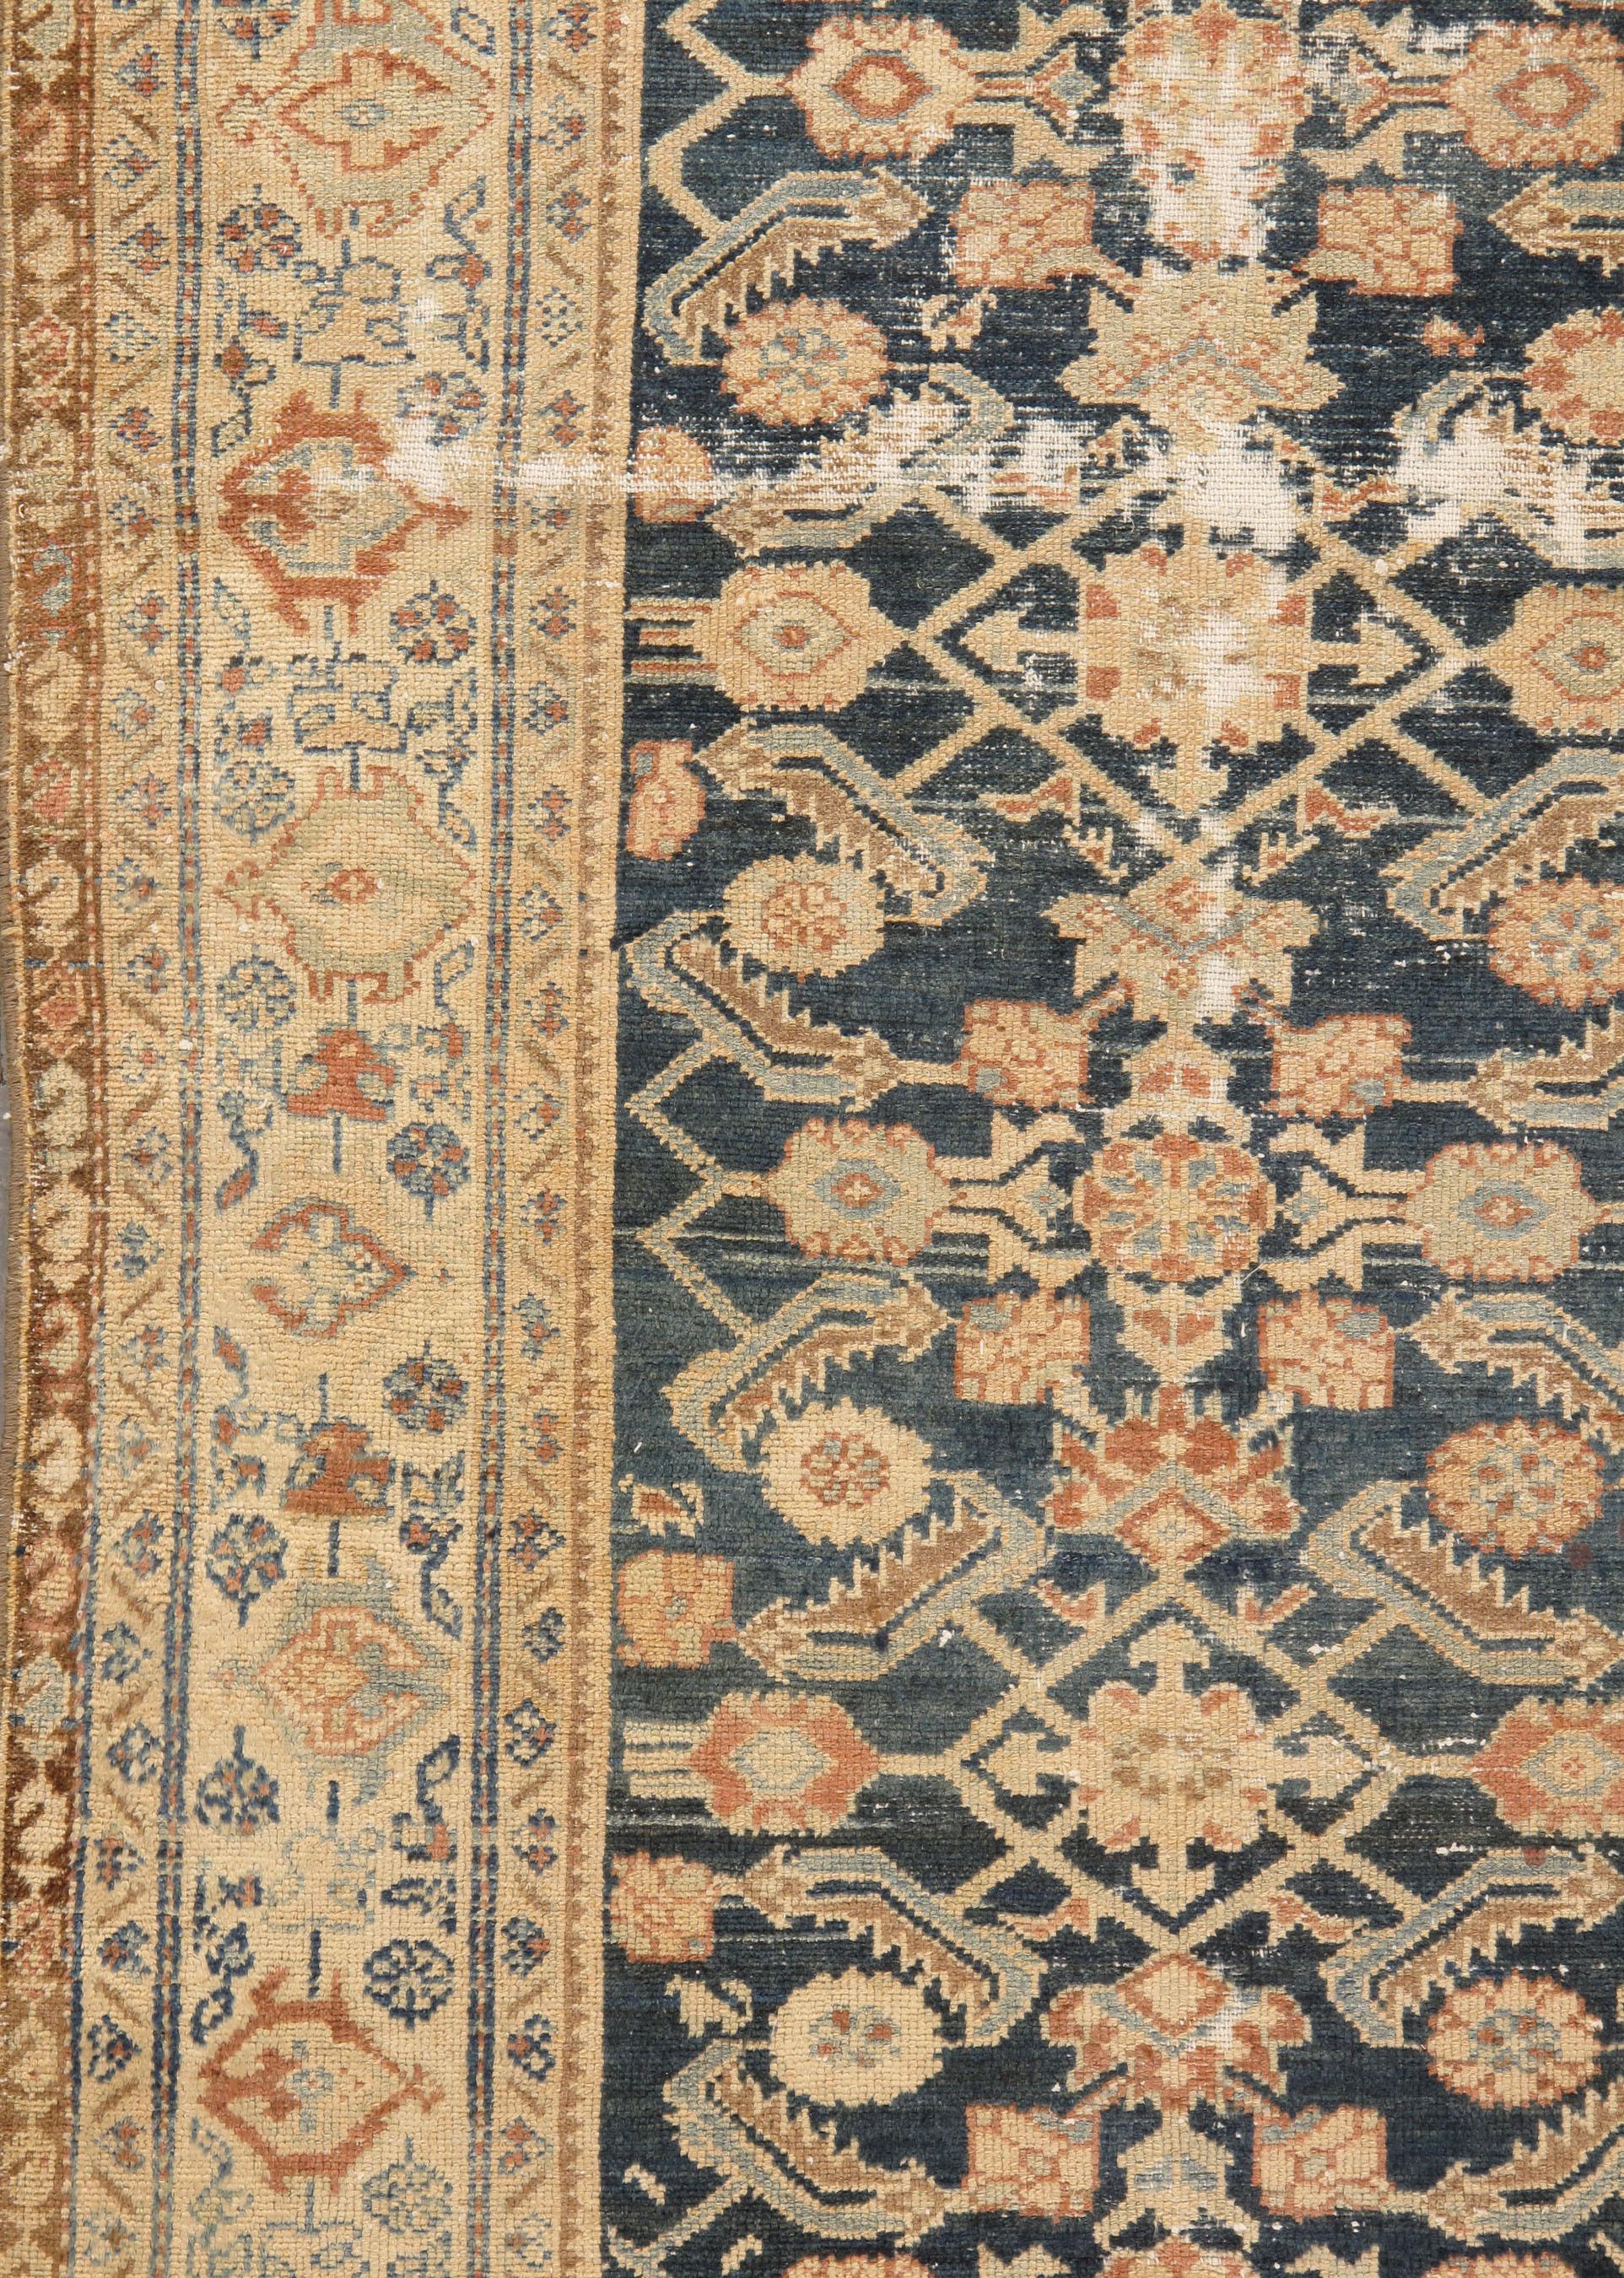 Antique Slightly Distressed Persian Malayer Rug, circa 1900  4'4 x 5'5 In Distressed Condition For Sale In New York, NY